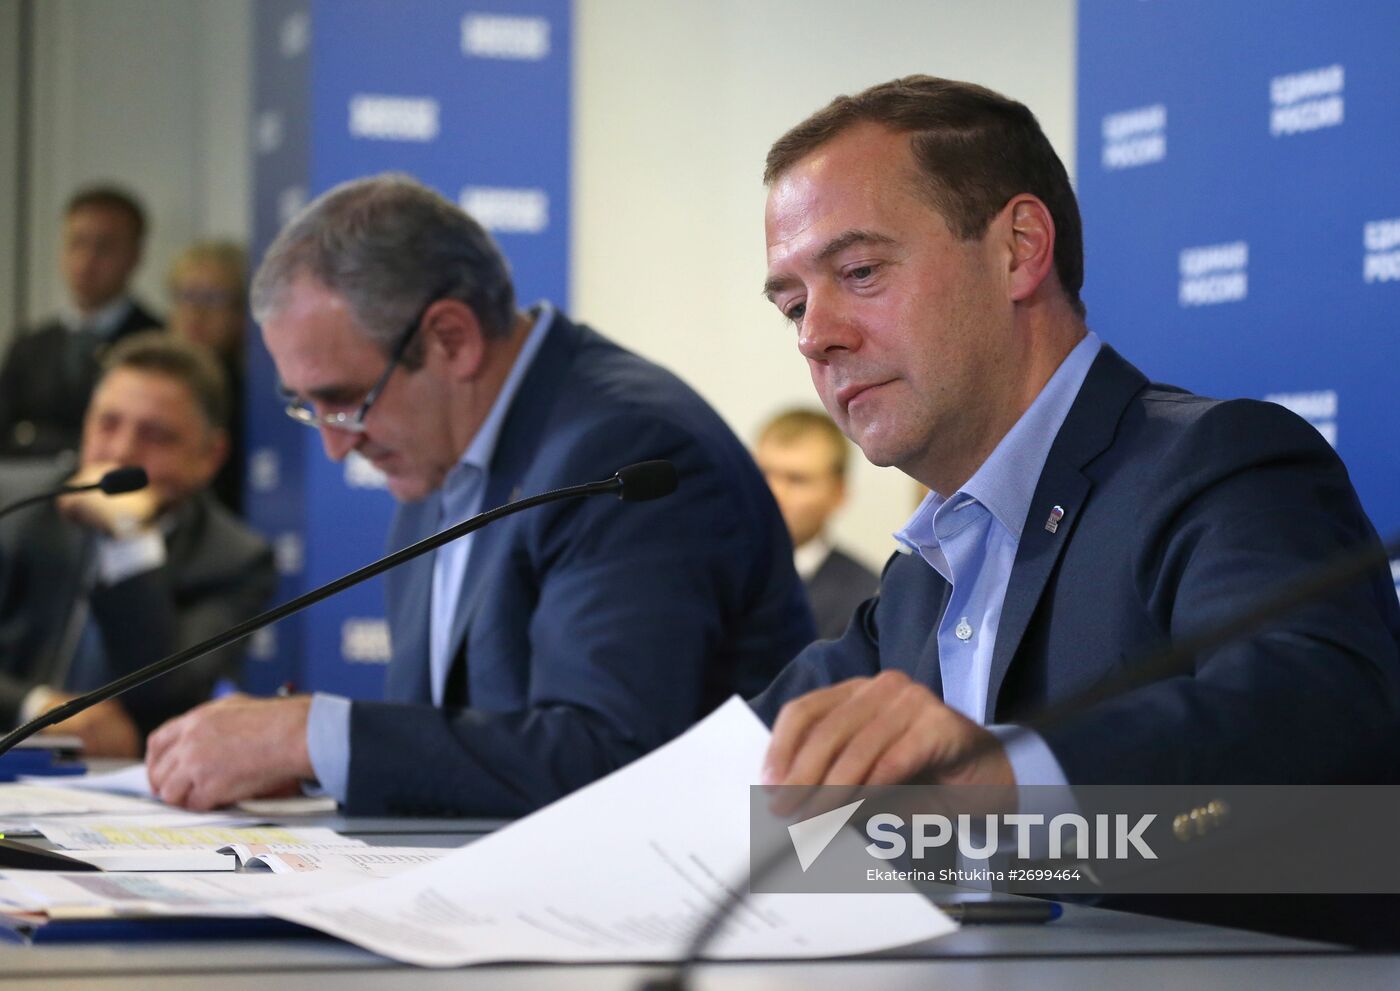 Dmitry Medvedev conducts videoconference with United Russia party representatives in Russian regions which held elections